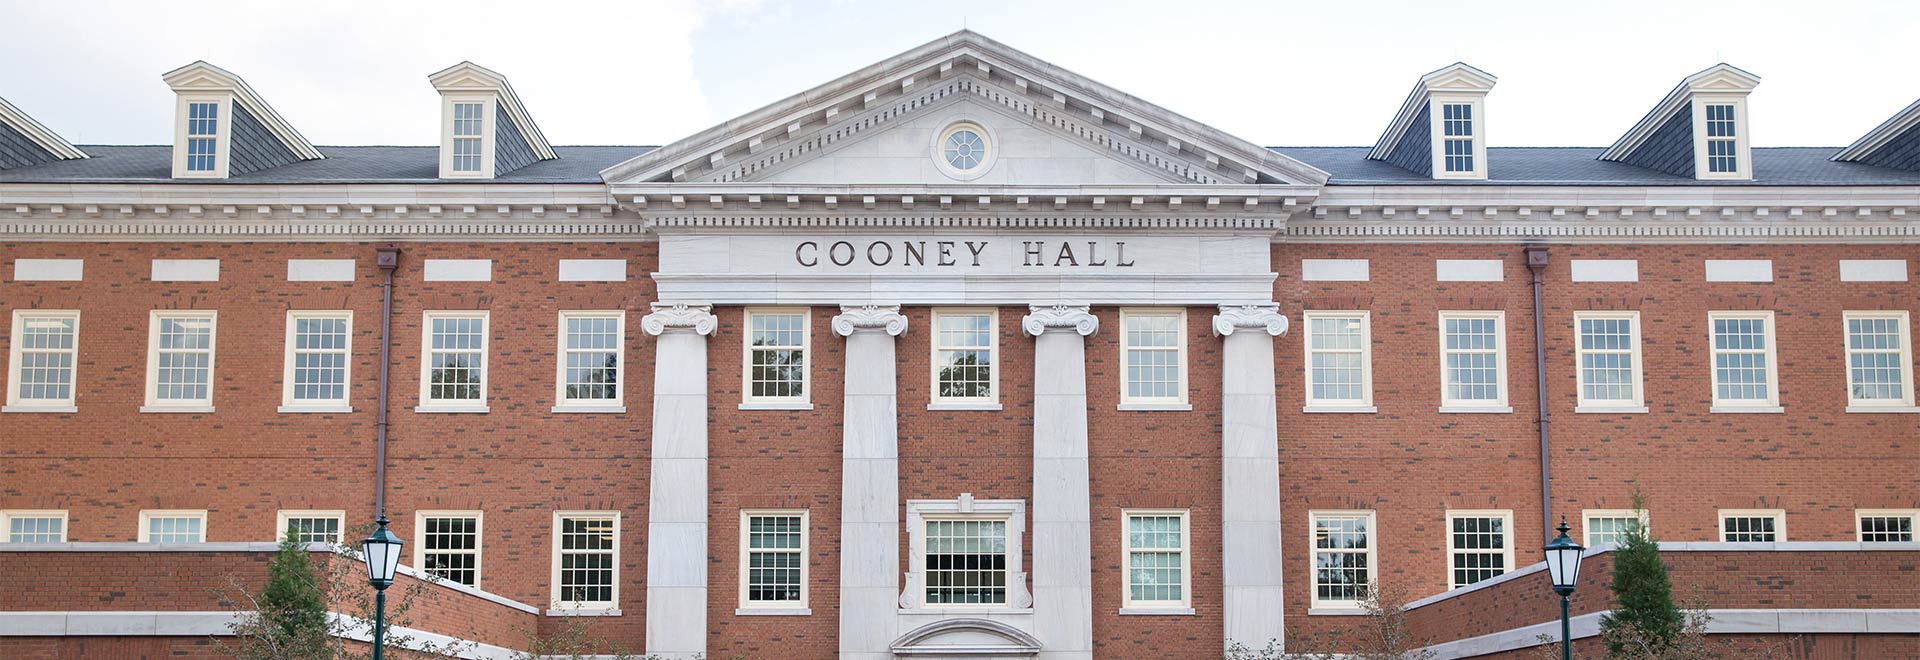 A photograph of the exterior of a red brick building labeled Cooney Hall